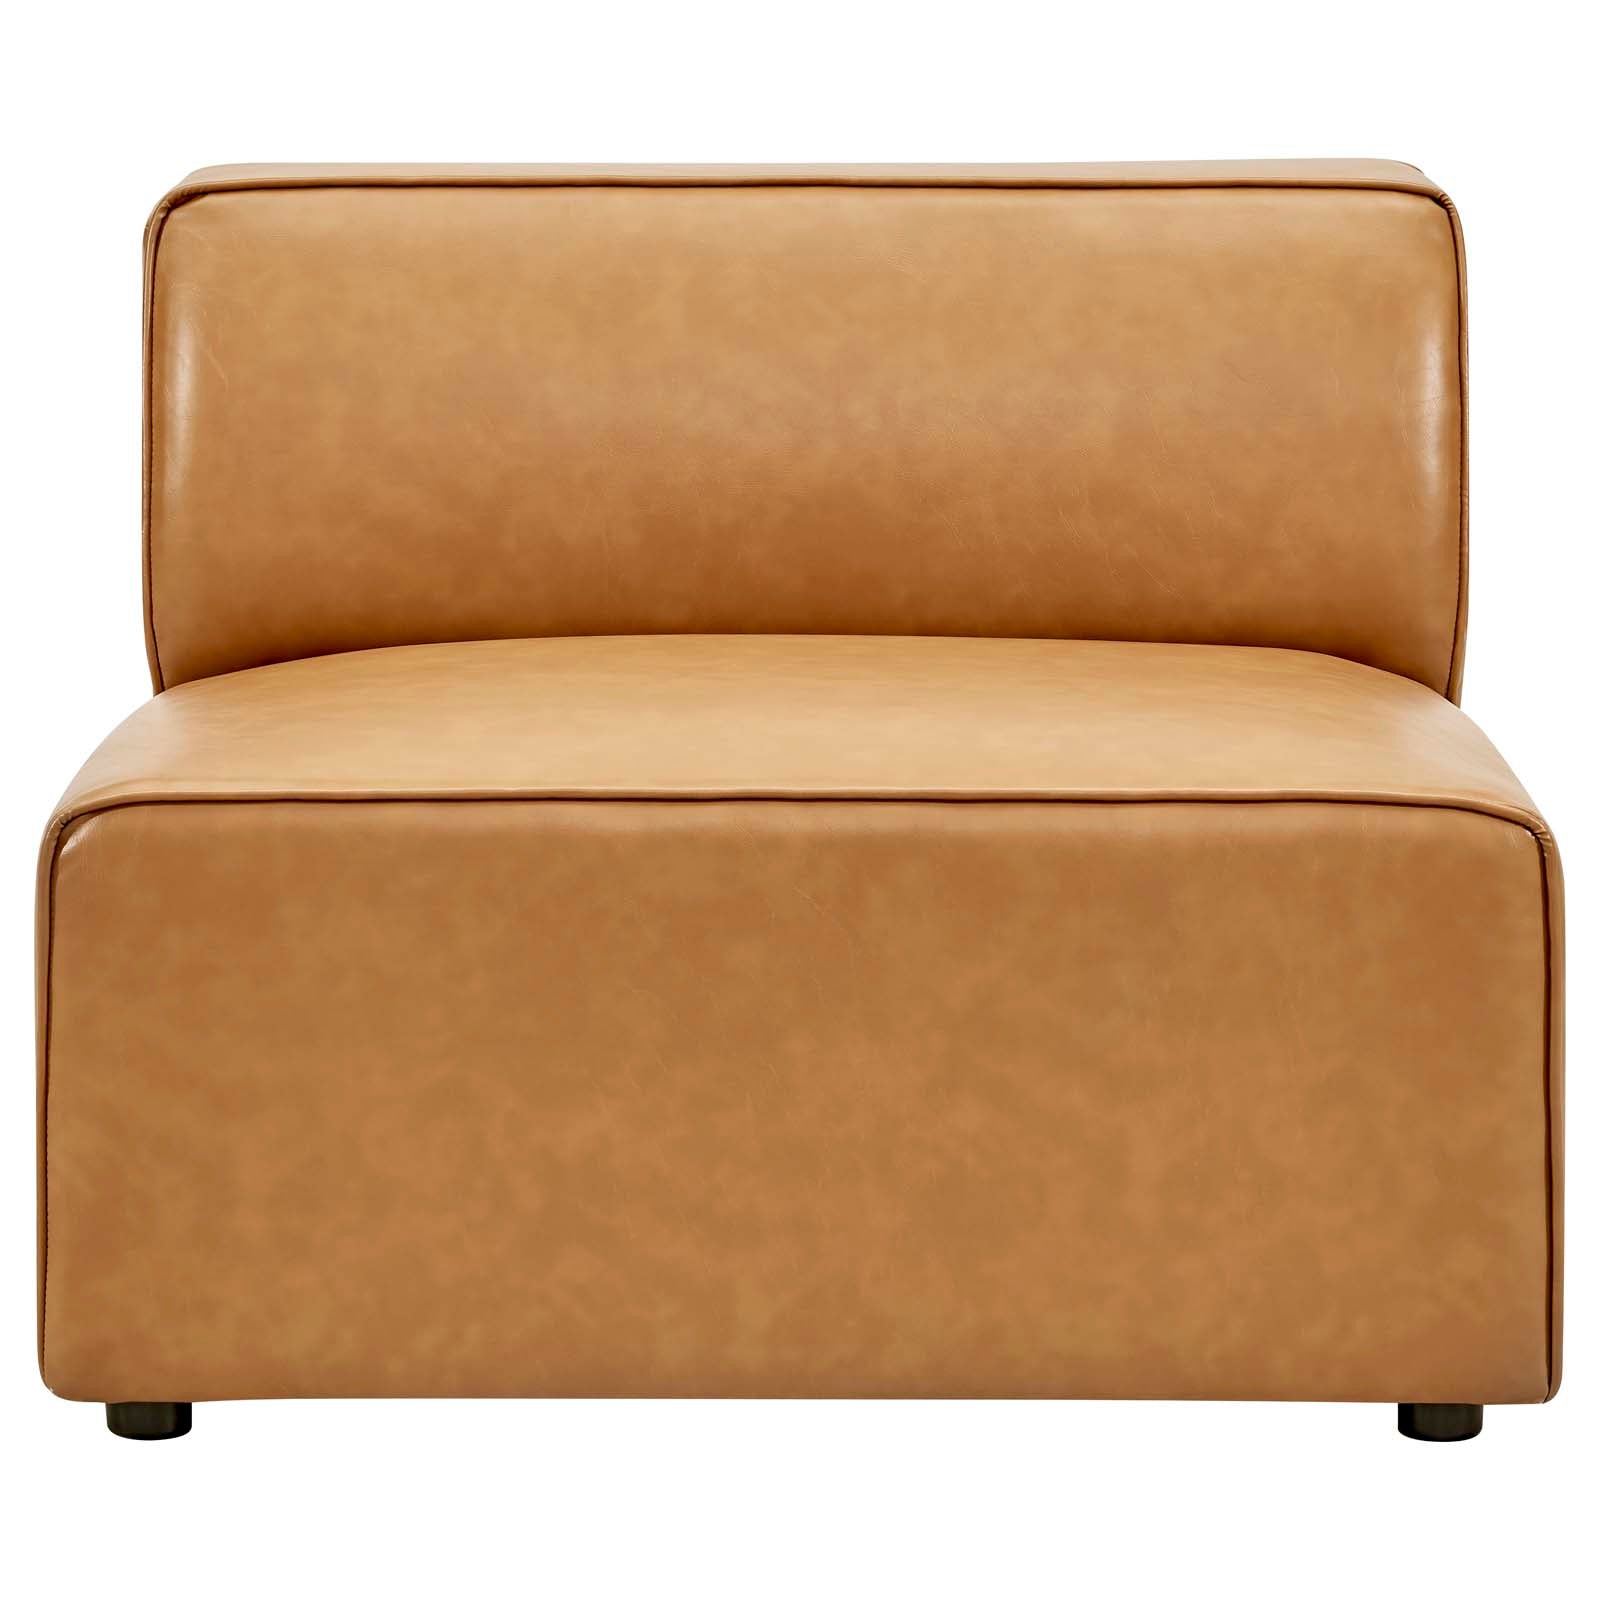 Modway Accent Chairs - Mingle Vegan Leather Armless Chair Tan